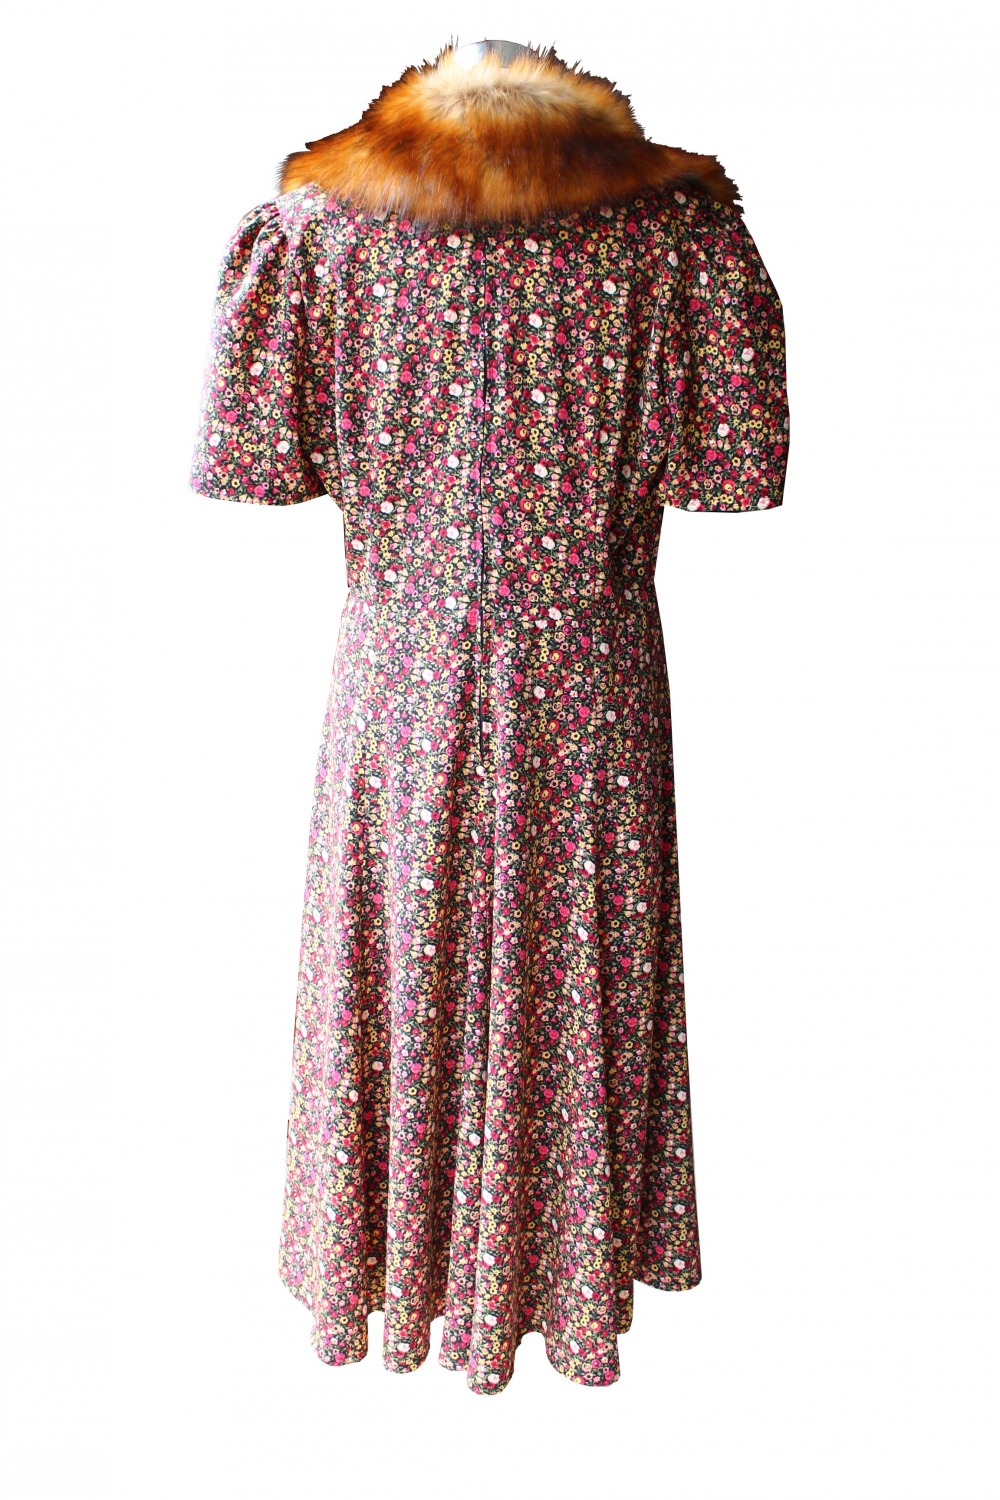 Ladies Wartime Goodwood Costume Size 16 - 18 Image